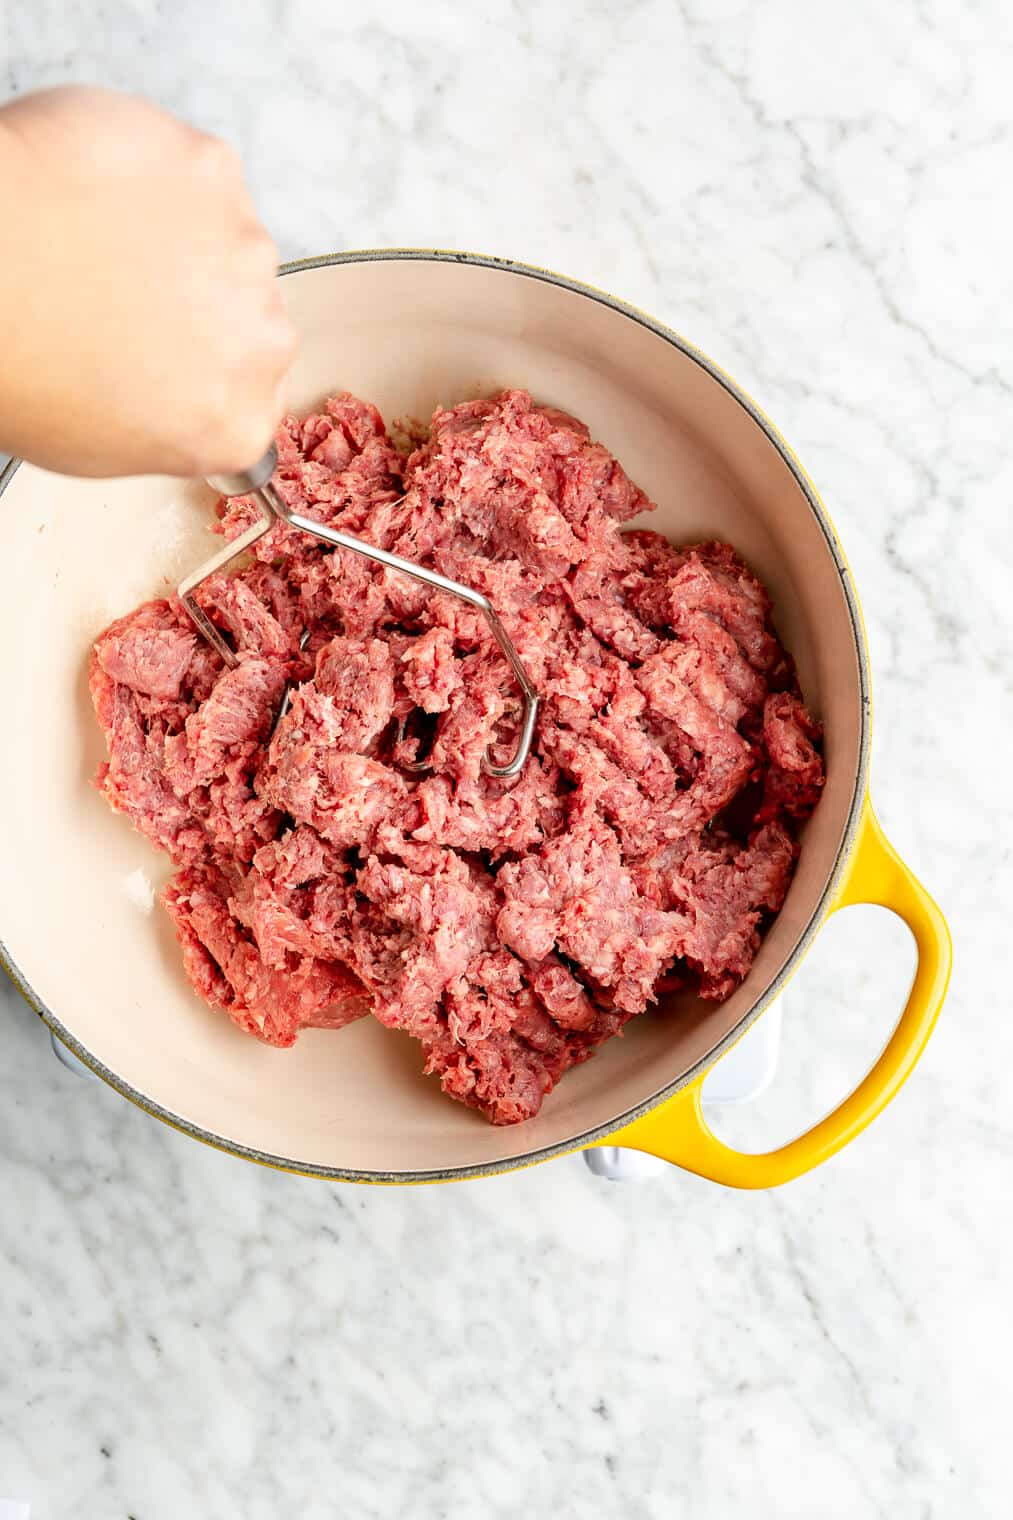 Ground beef being cooked and mashed with a metal potato masher in a yellow enameled cast iron pot.